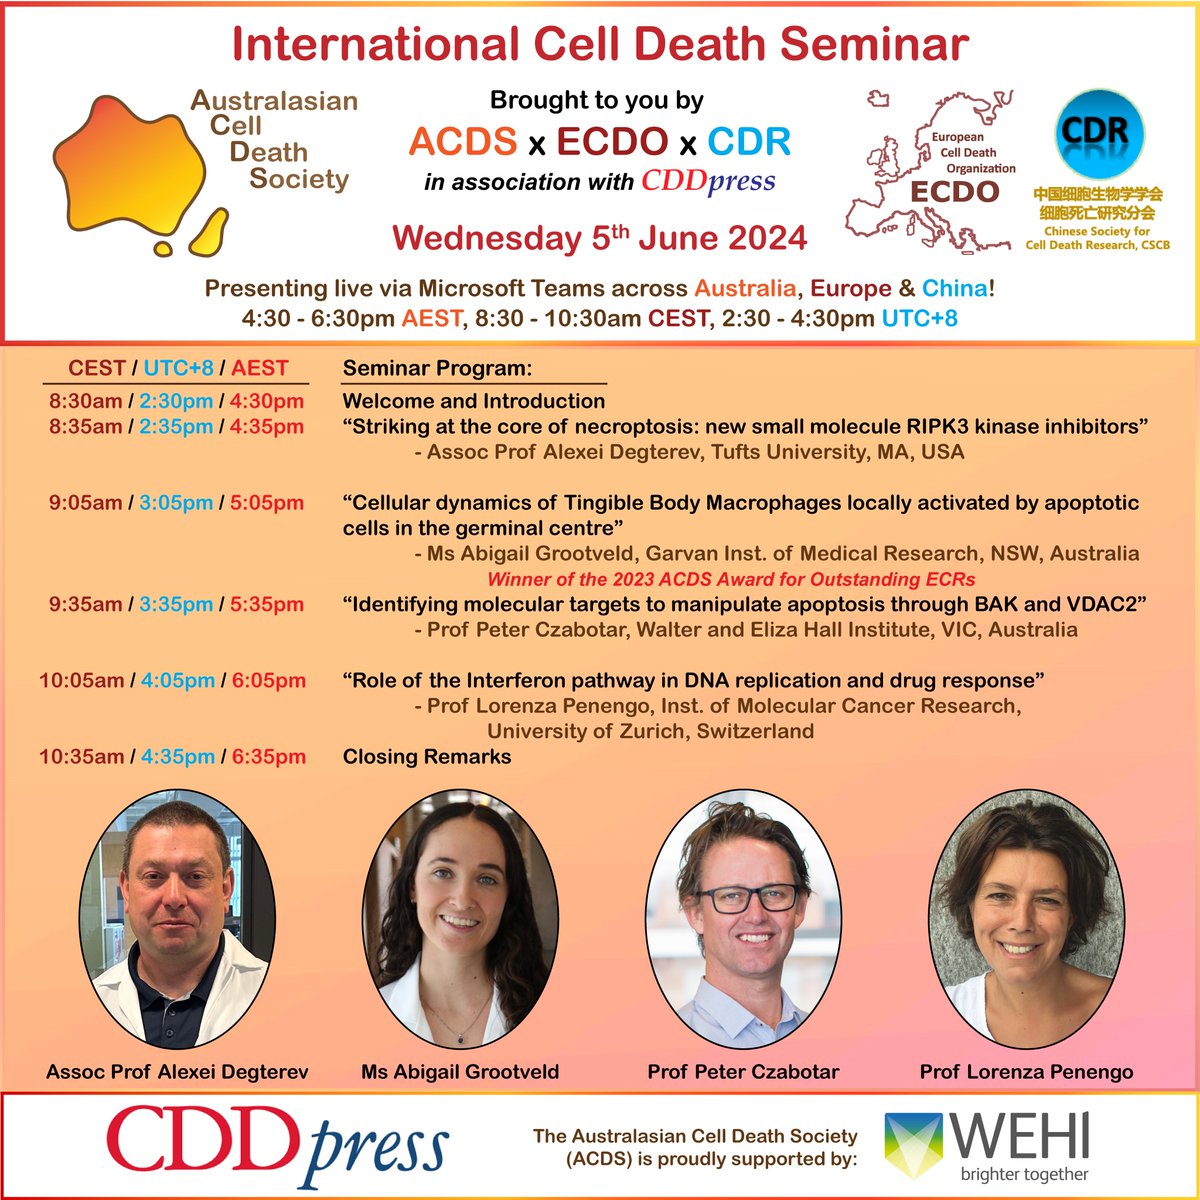 We are delighted to announce our upcoming International Cell Death Seminar - an exciting 
collaboration between ACDS, @ECDOorg & Chinese Society for Cell Death Research, in association with @cddpress! 🤩
Save the date & be sure to join us on Wed 5th June; see flyer for times! 📅